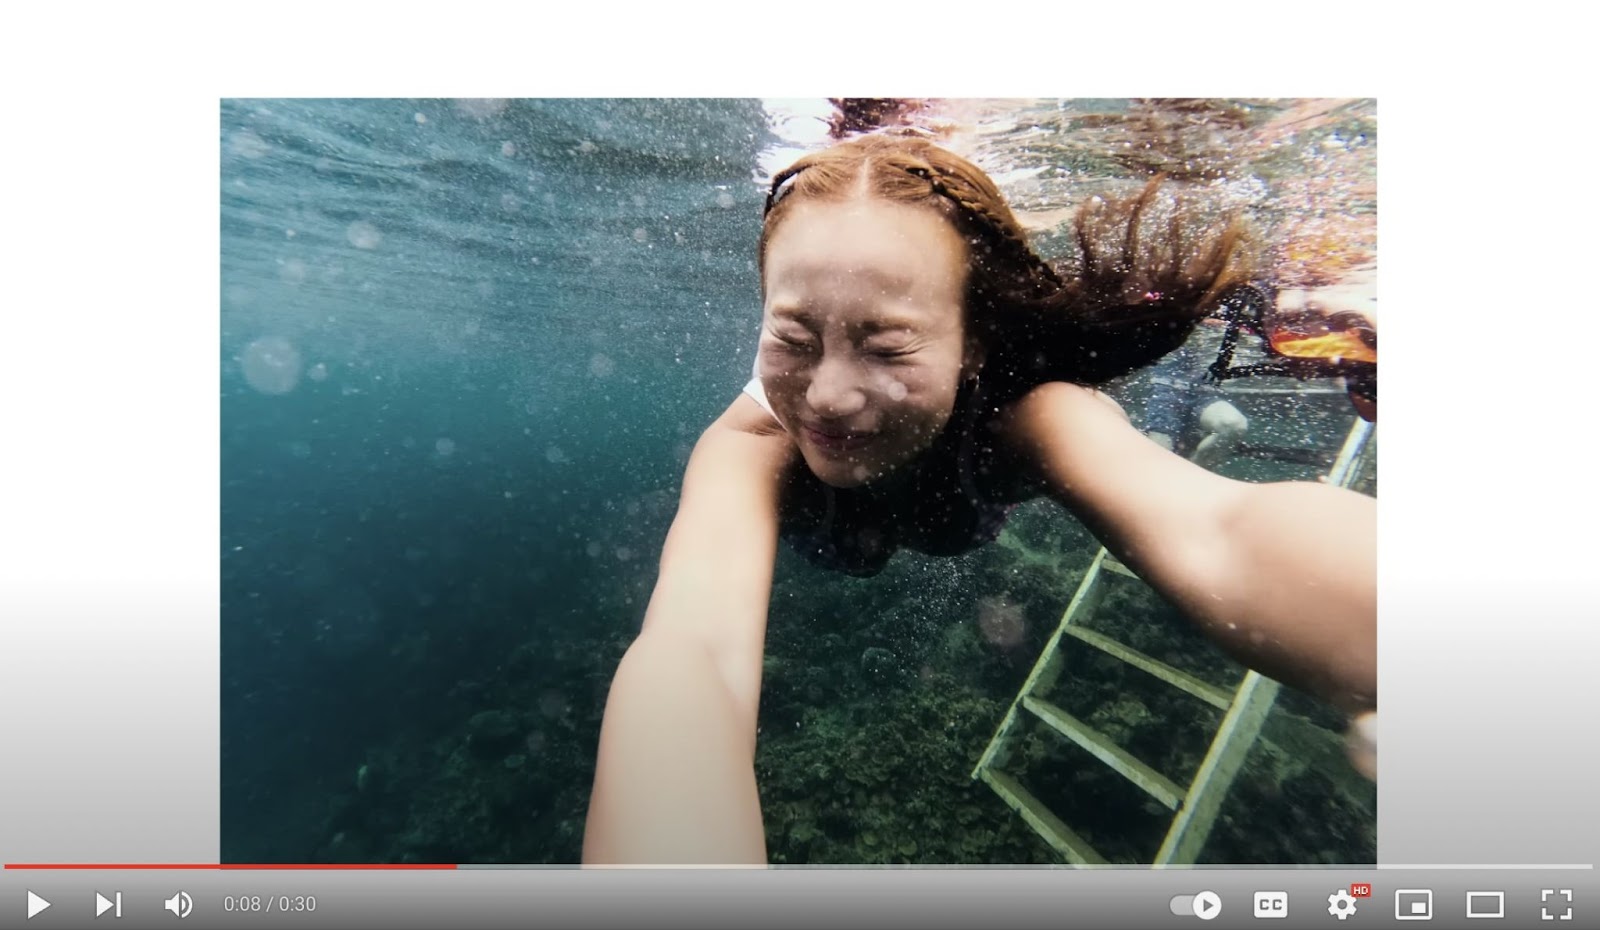 Airbnb’s video from a user, capturing her diving in the sea